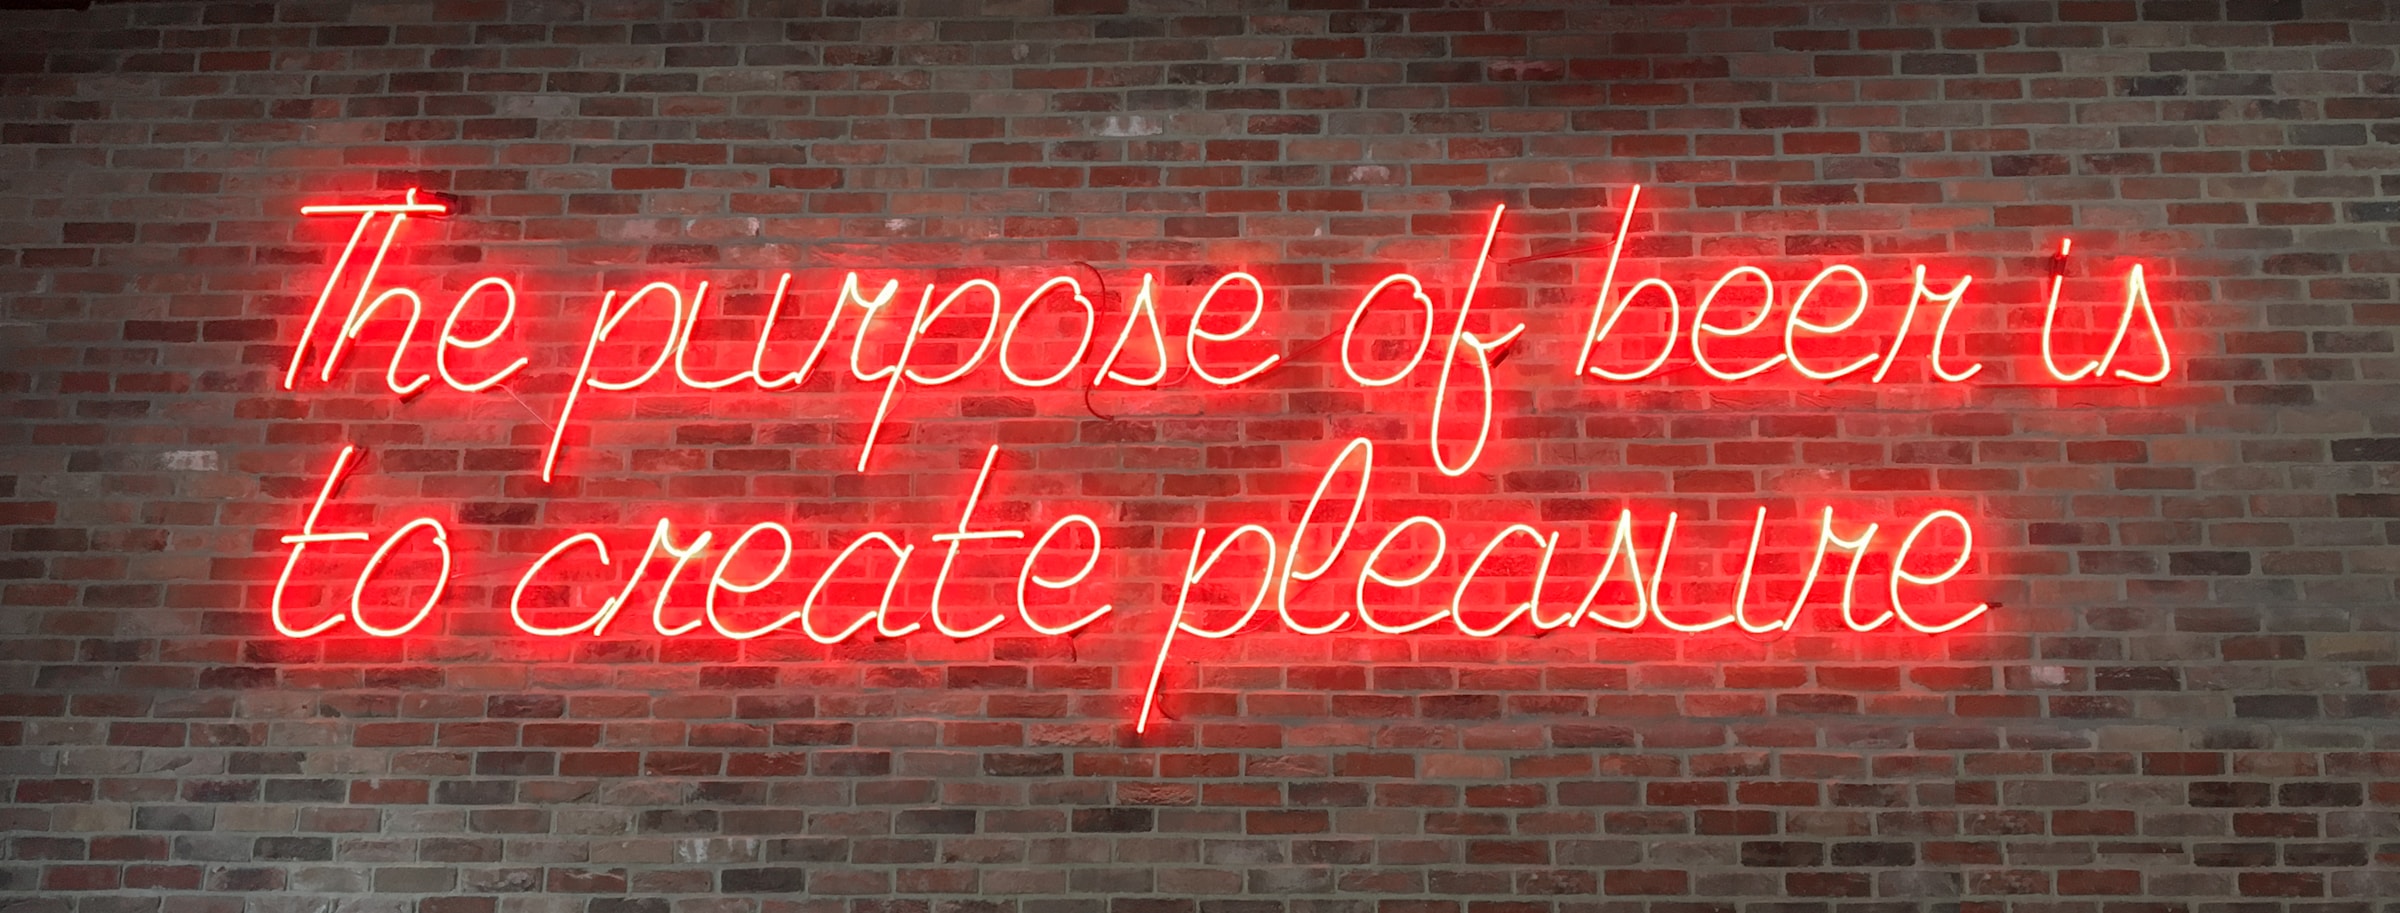 Does Your Company Have a Culture of Purpose?